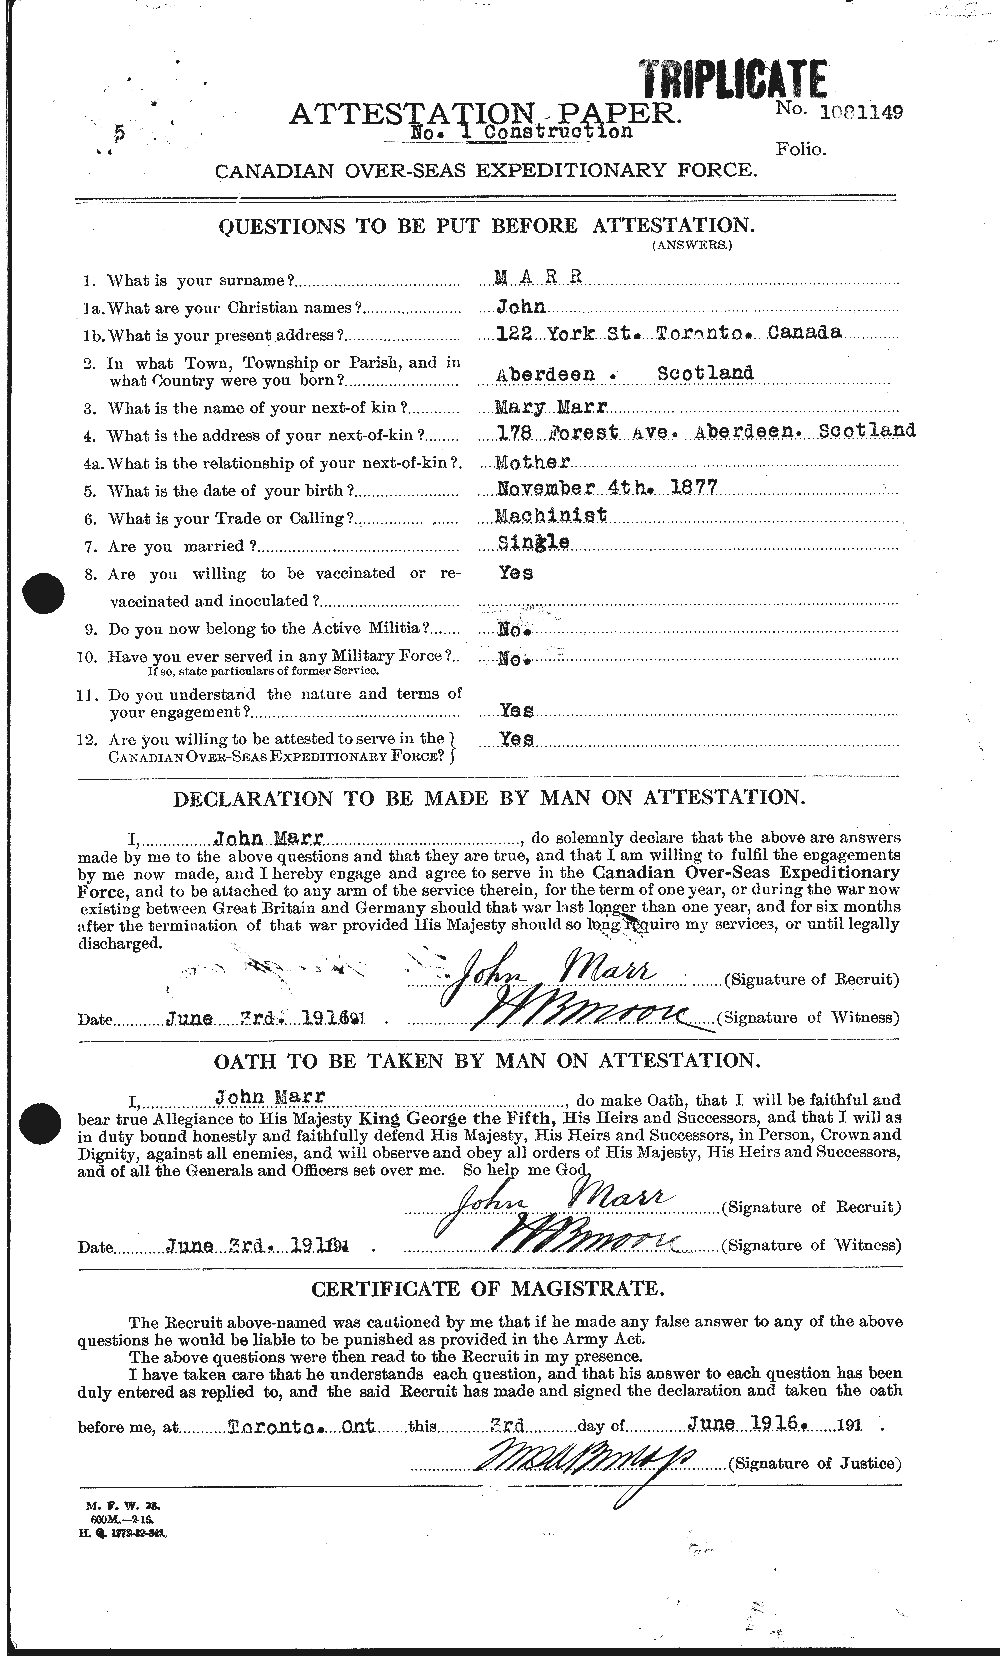 Personnel Records of the First World War - CEF 485656a